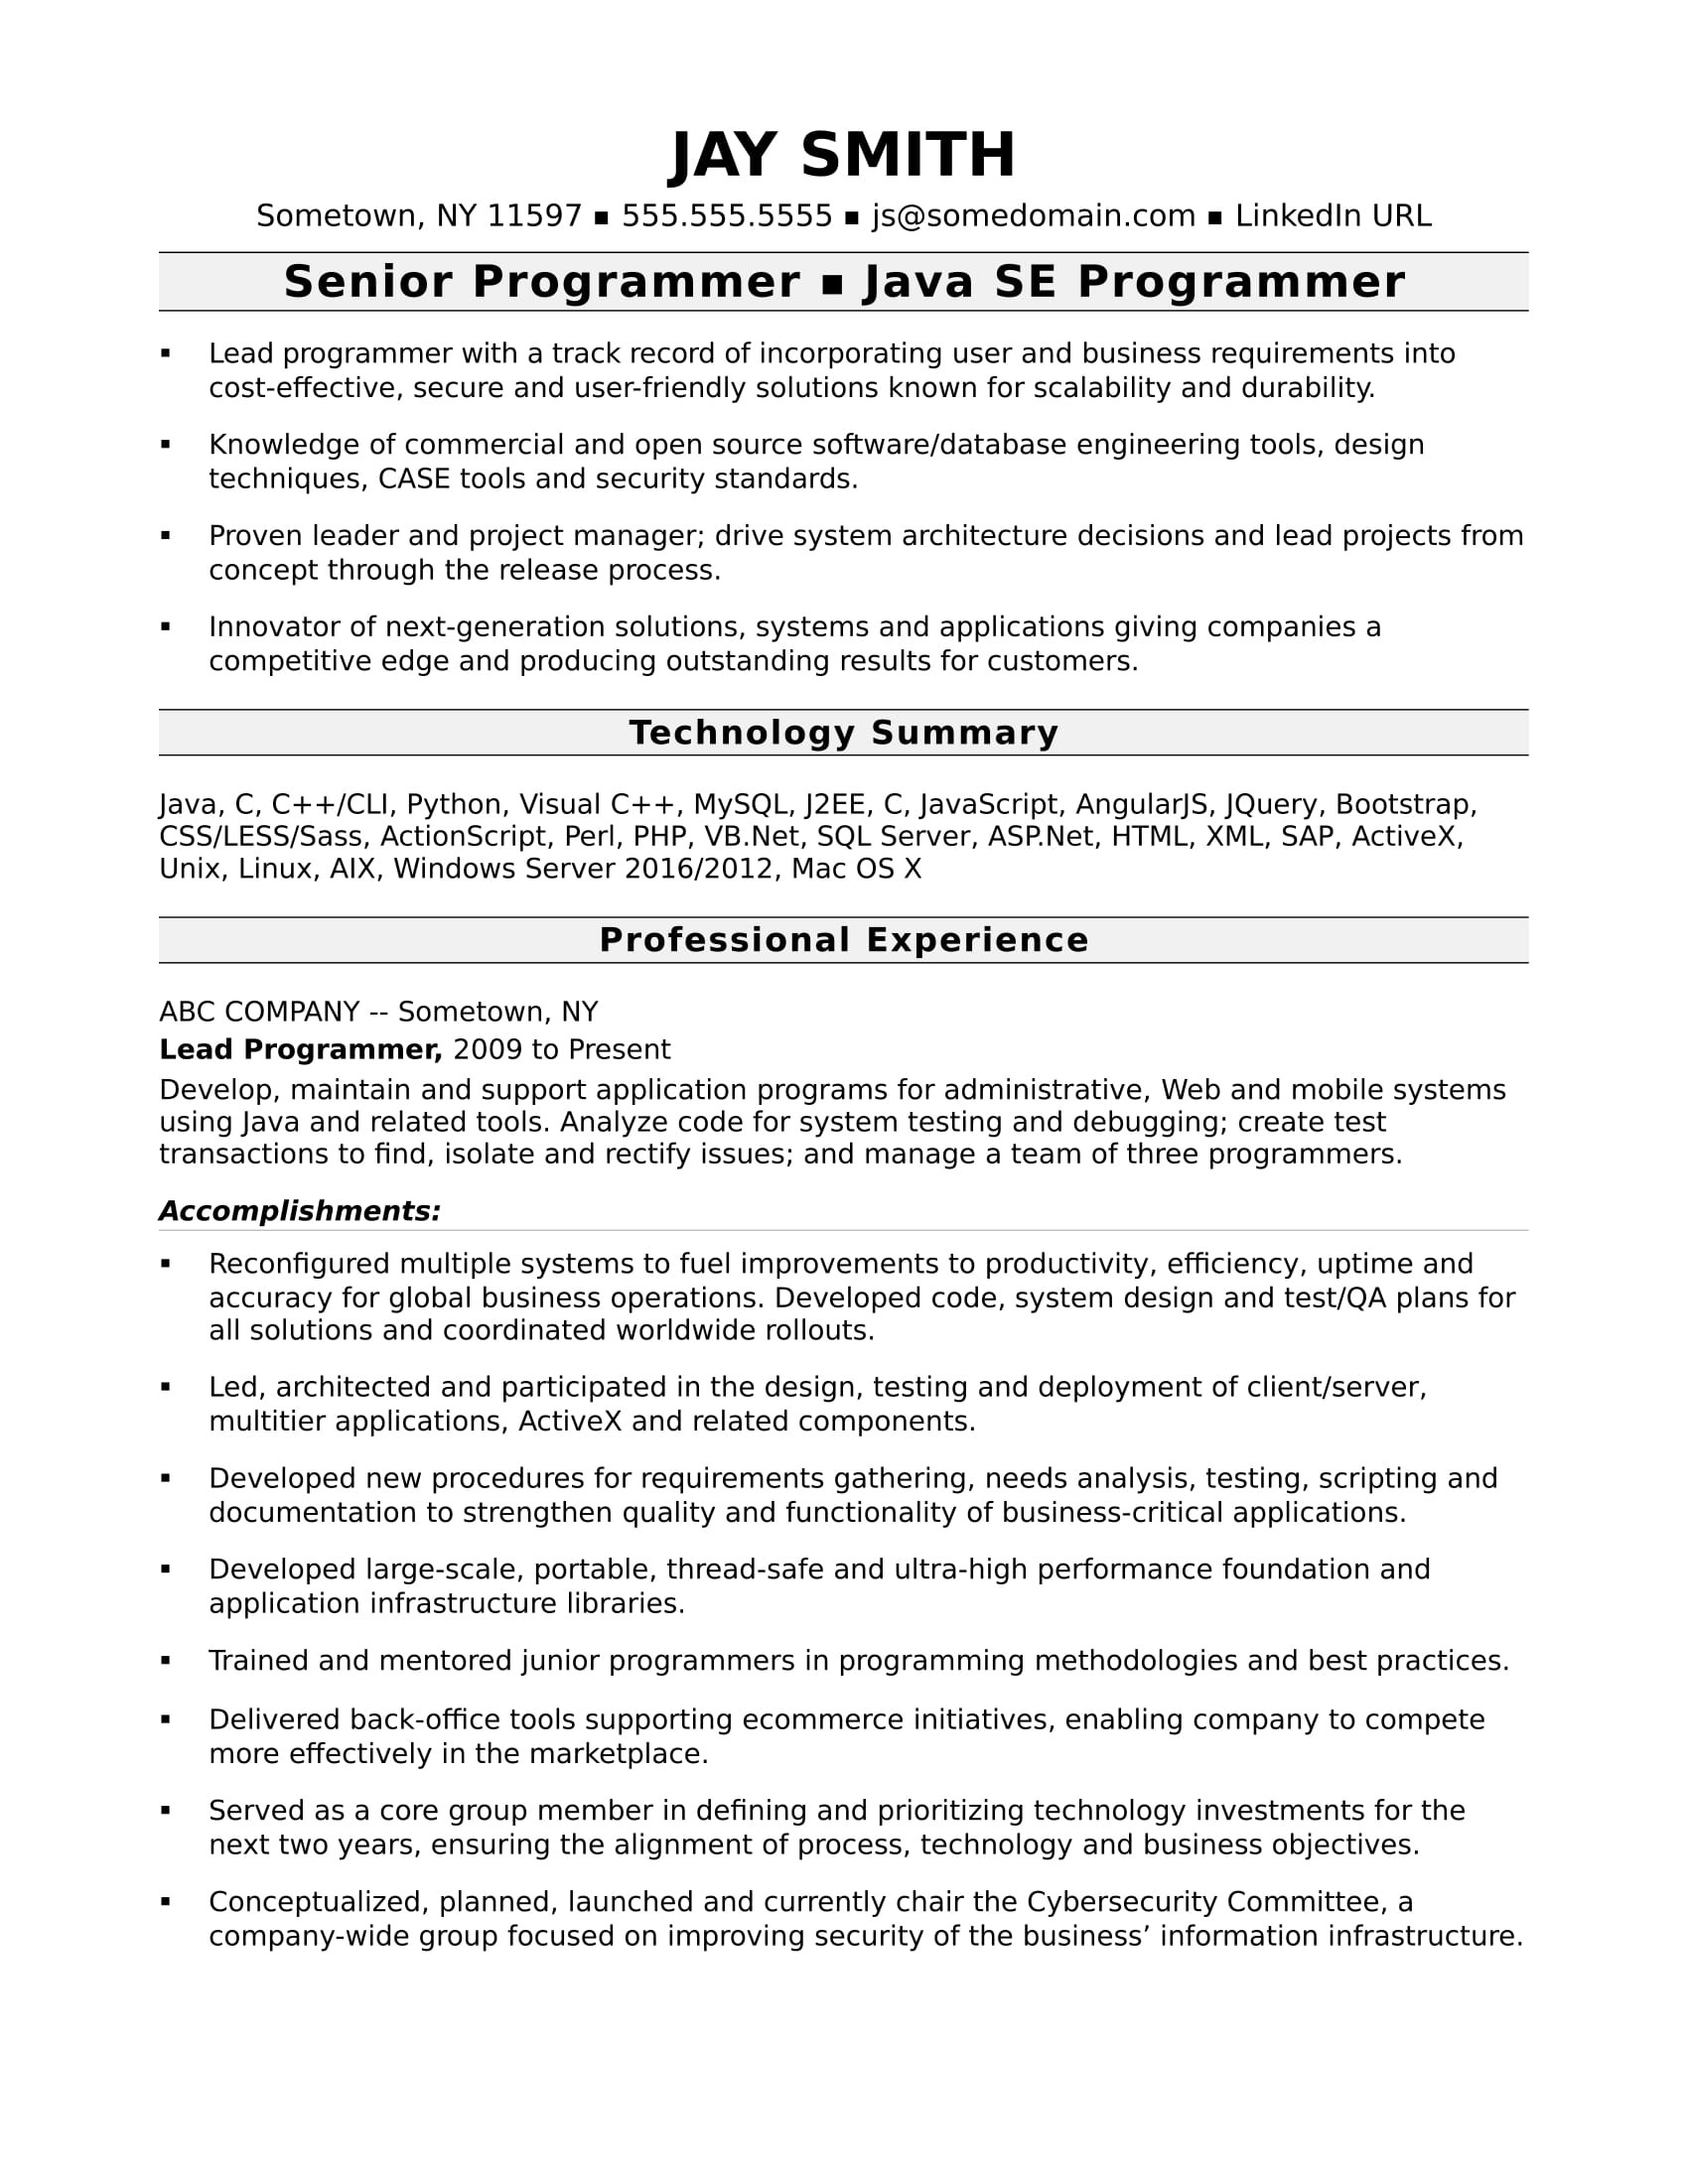 Describe Your Computer Skills Pc and Mac Resume Sample Programmer Resume Template Monster.com